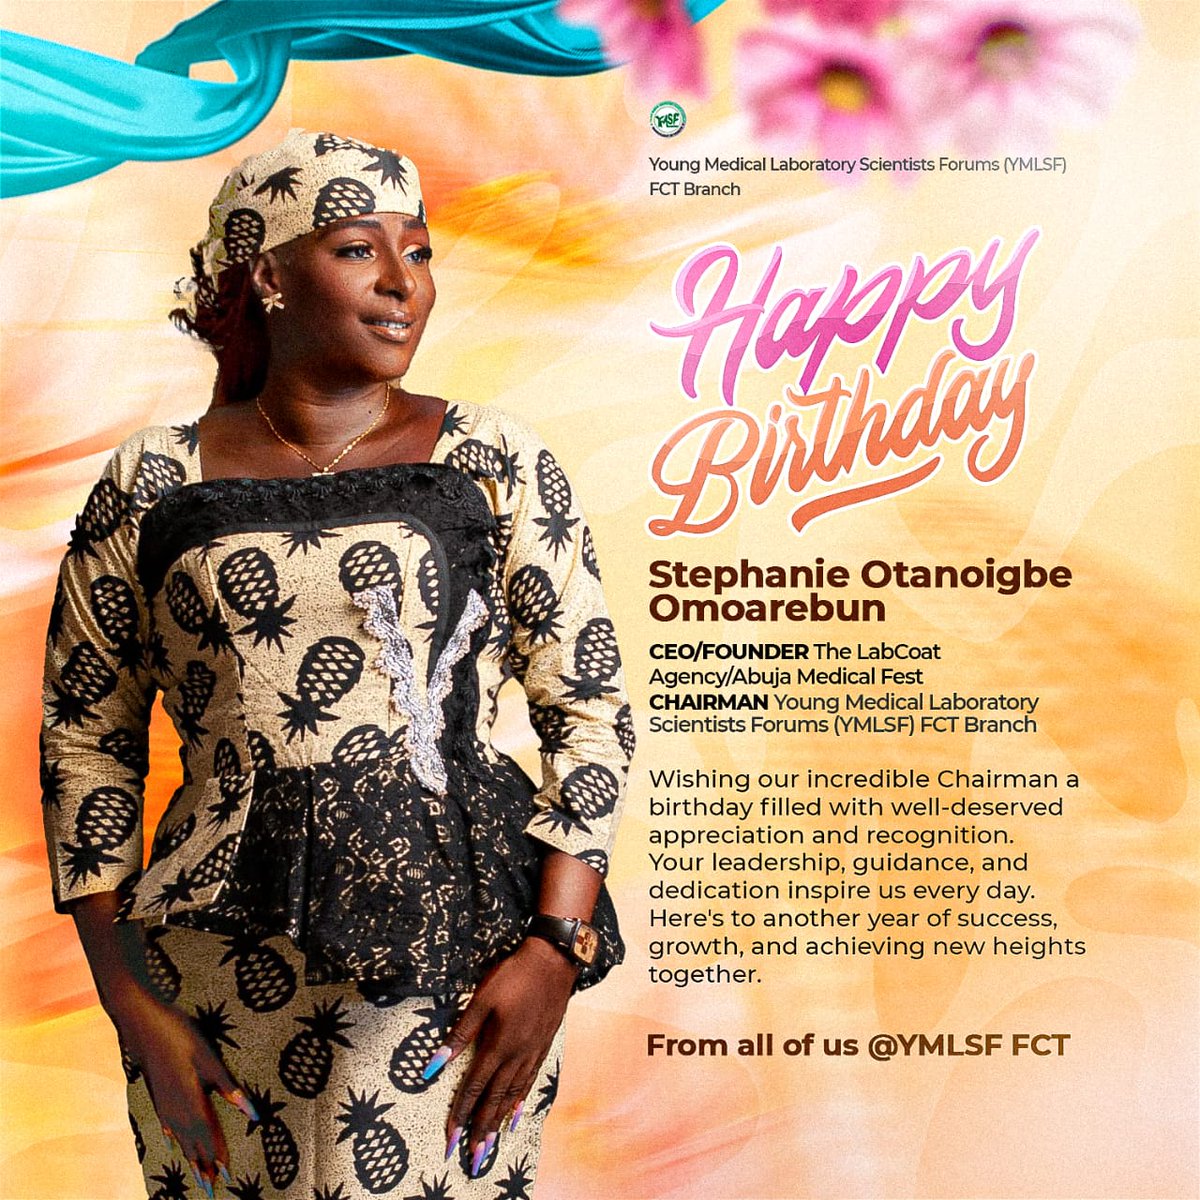 Happy Birthday MLS Stephanie Otanoigbe. Wishing you a day filled with love, laughter, and all the things that bring you joy. May this year be your best one yet, full of wonderful moments and memories worth reliving. You deserve all the happiness in the world for the kindness